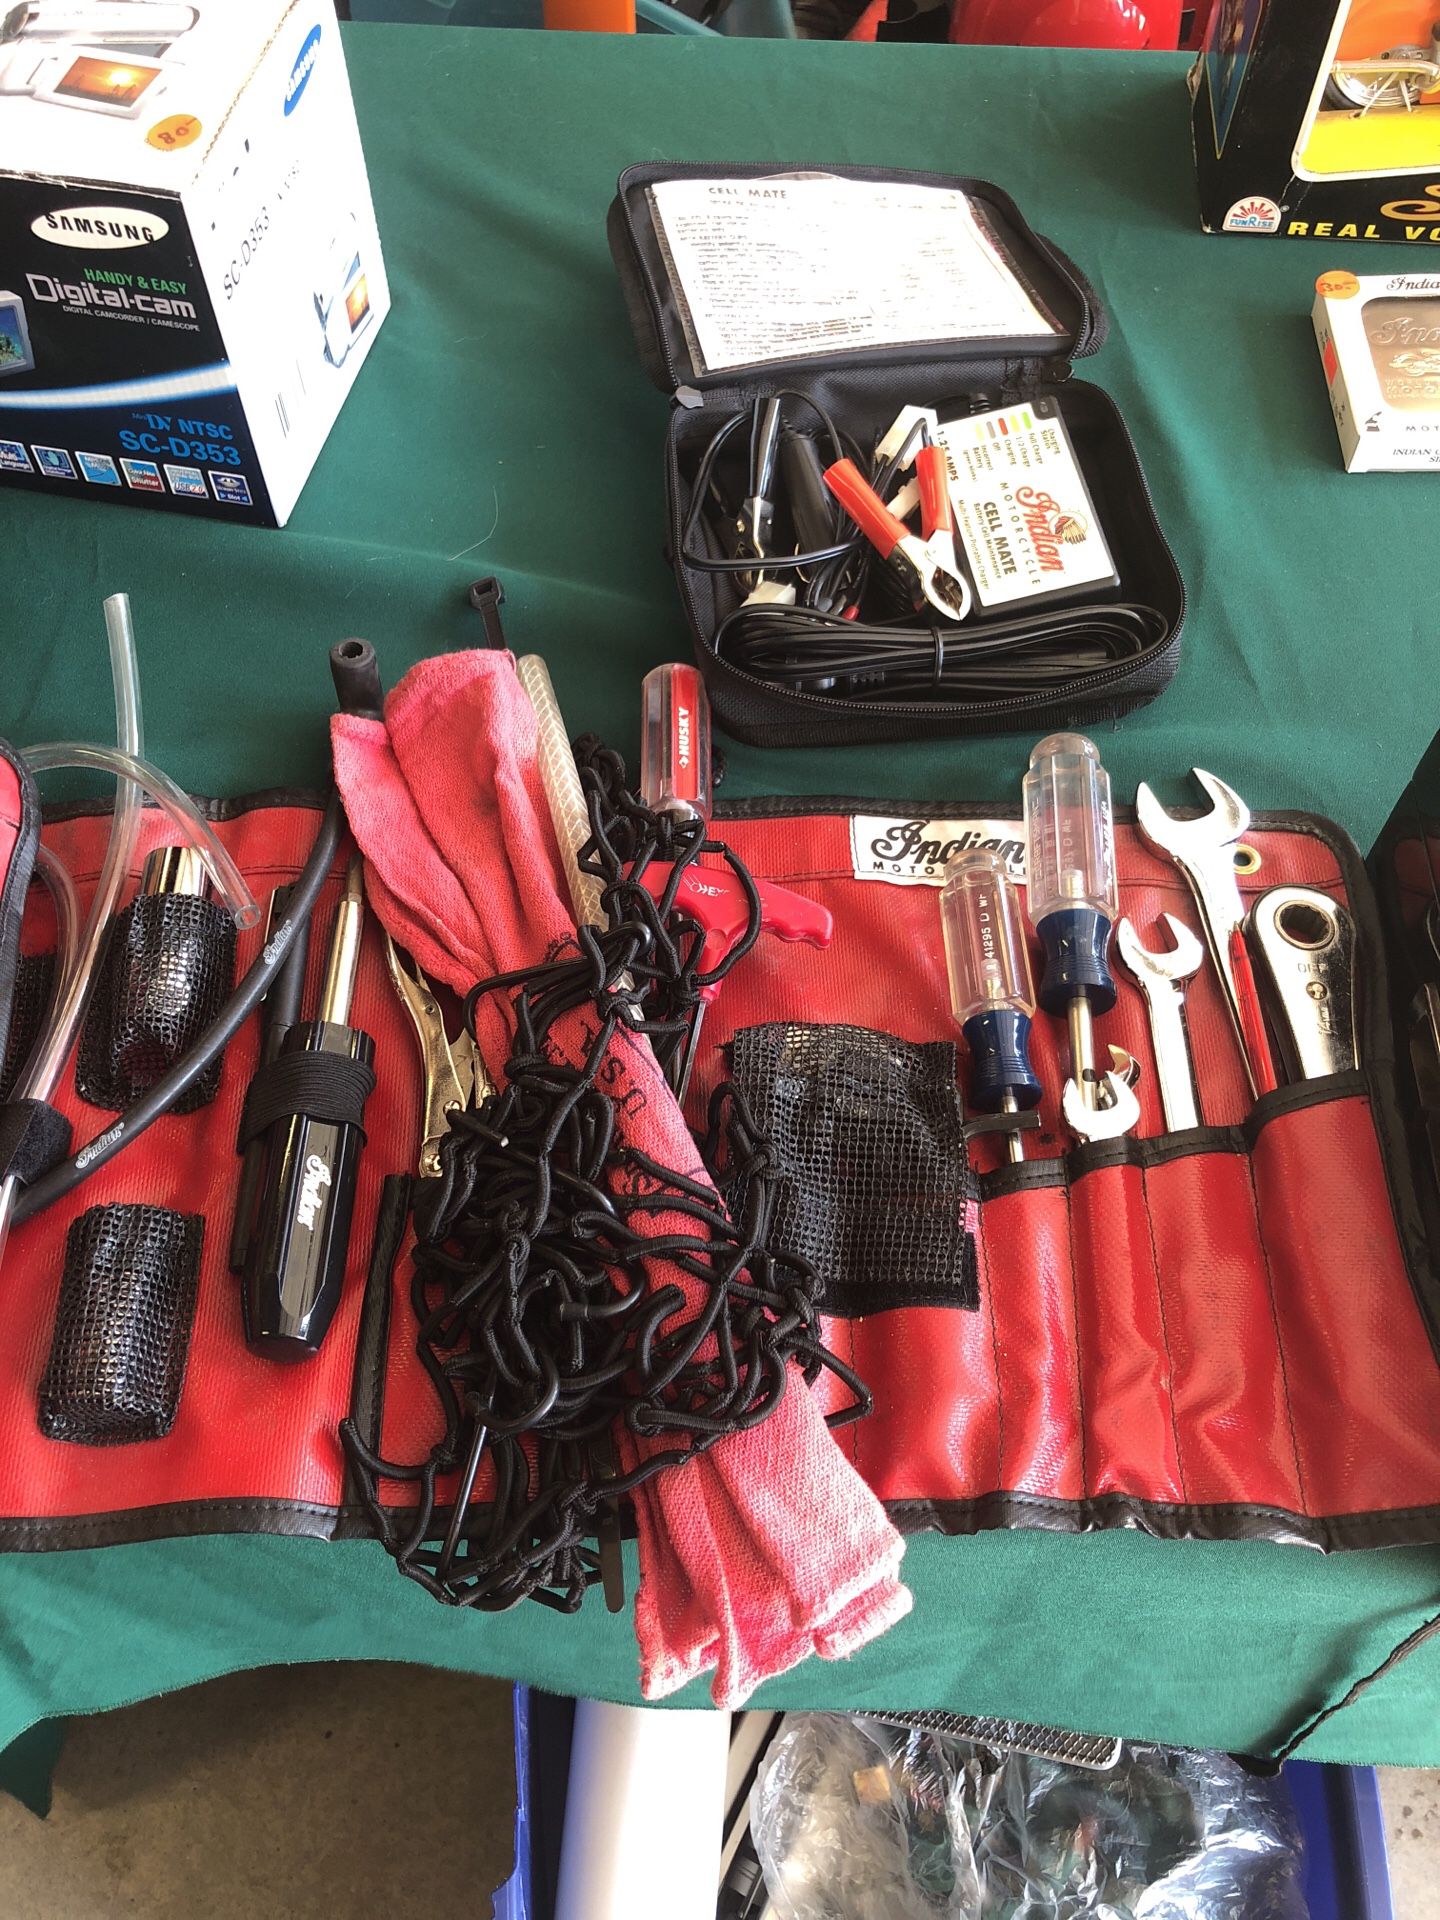 Indian motorcycle travel kit and tools